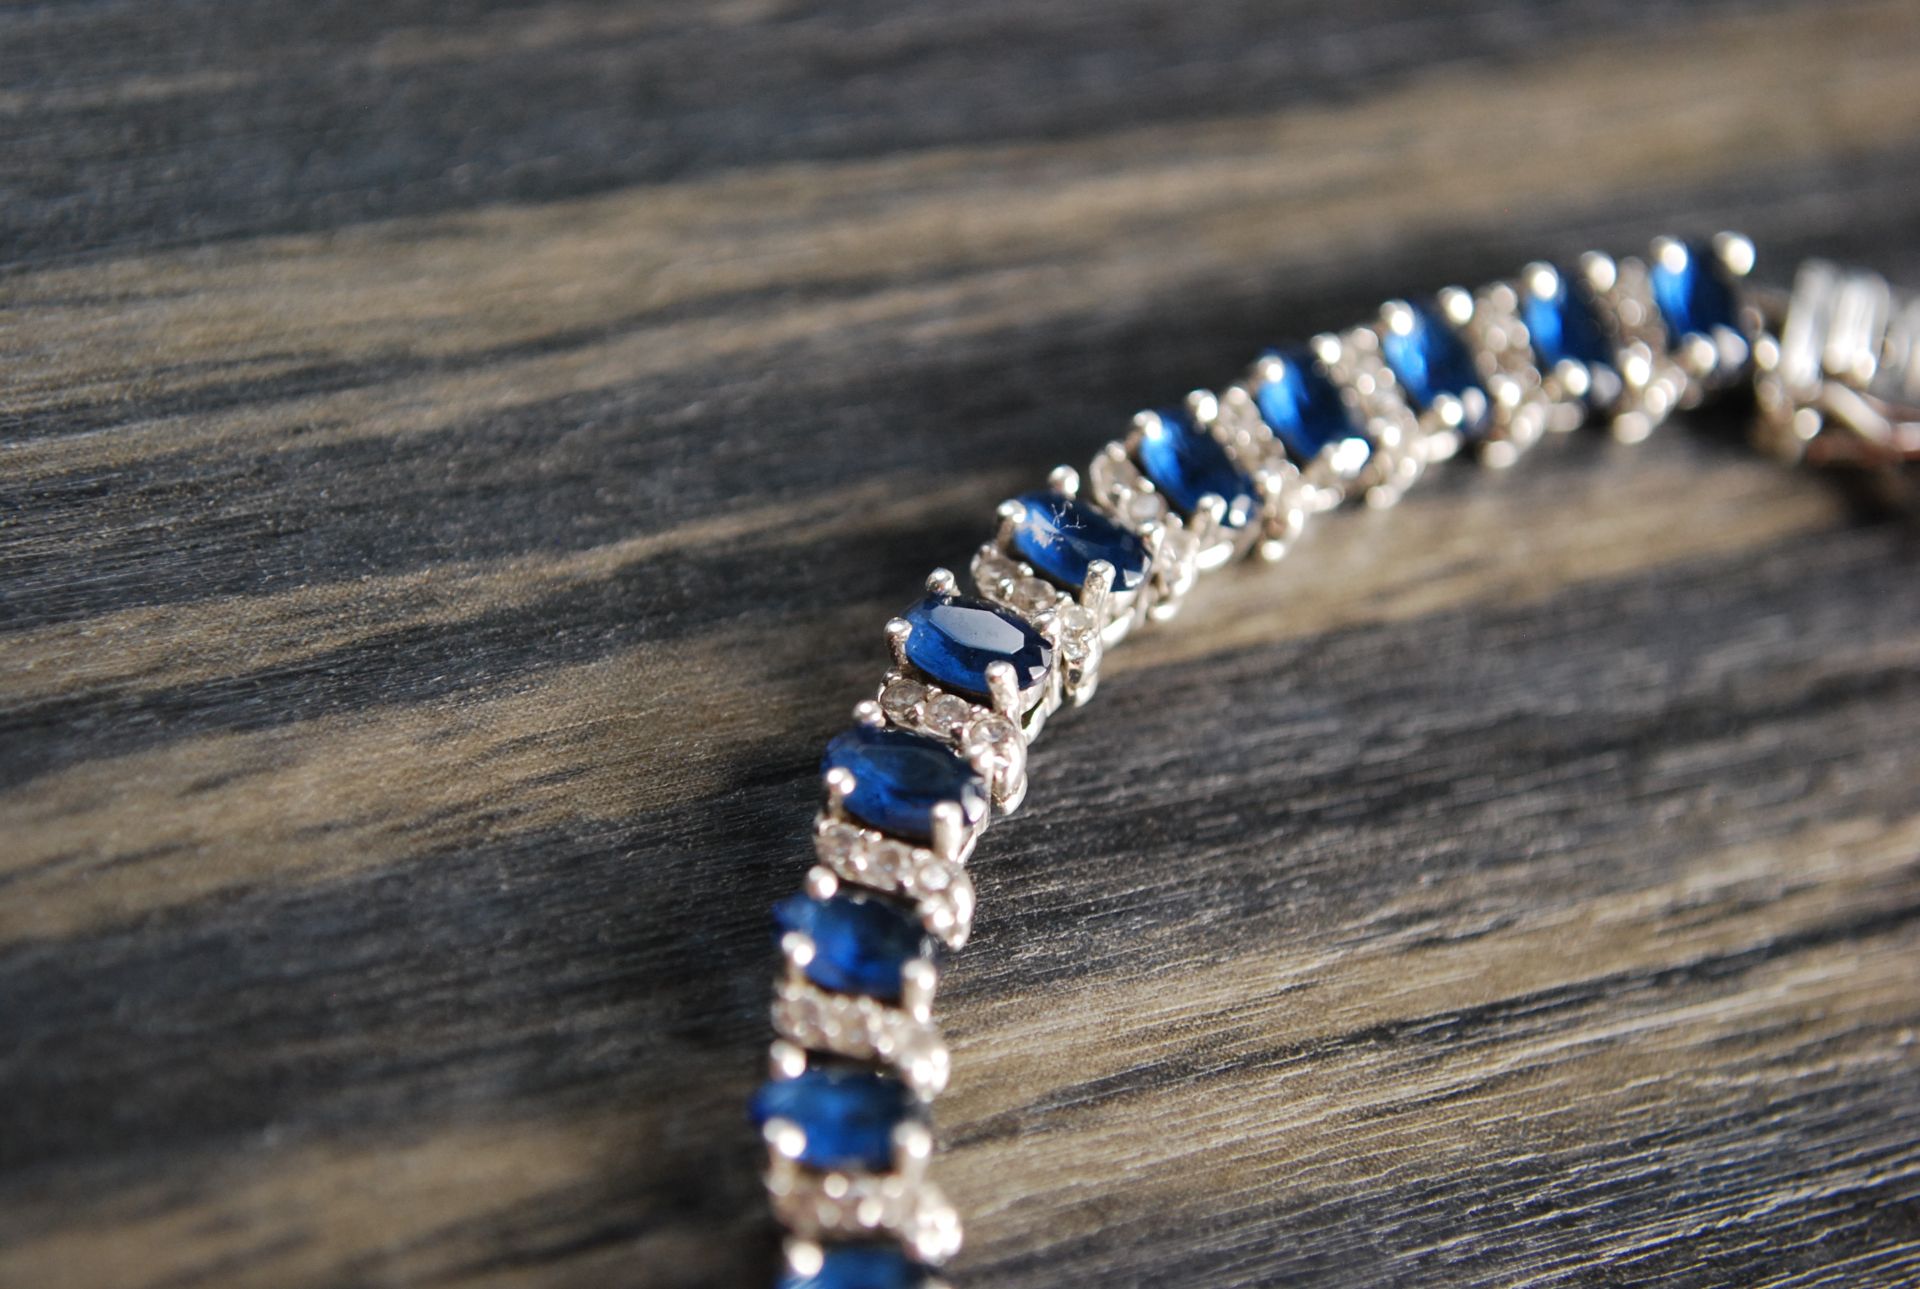 STUNNING SAPPHIRE BRACELET IN 925 SILVER - Image 2 of 3